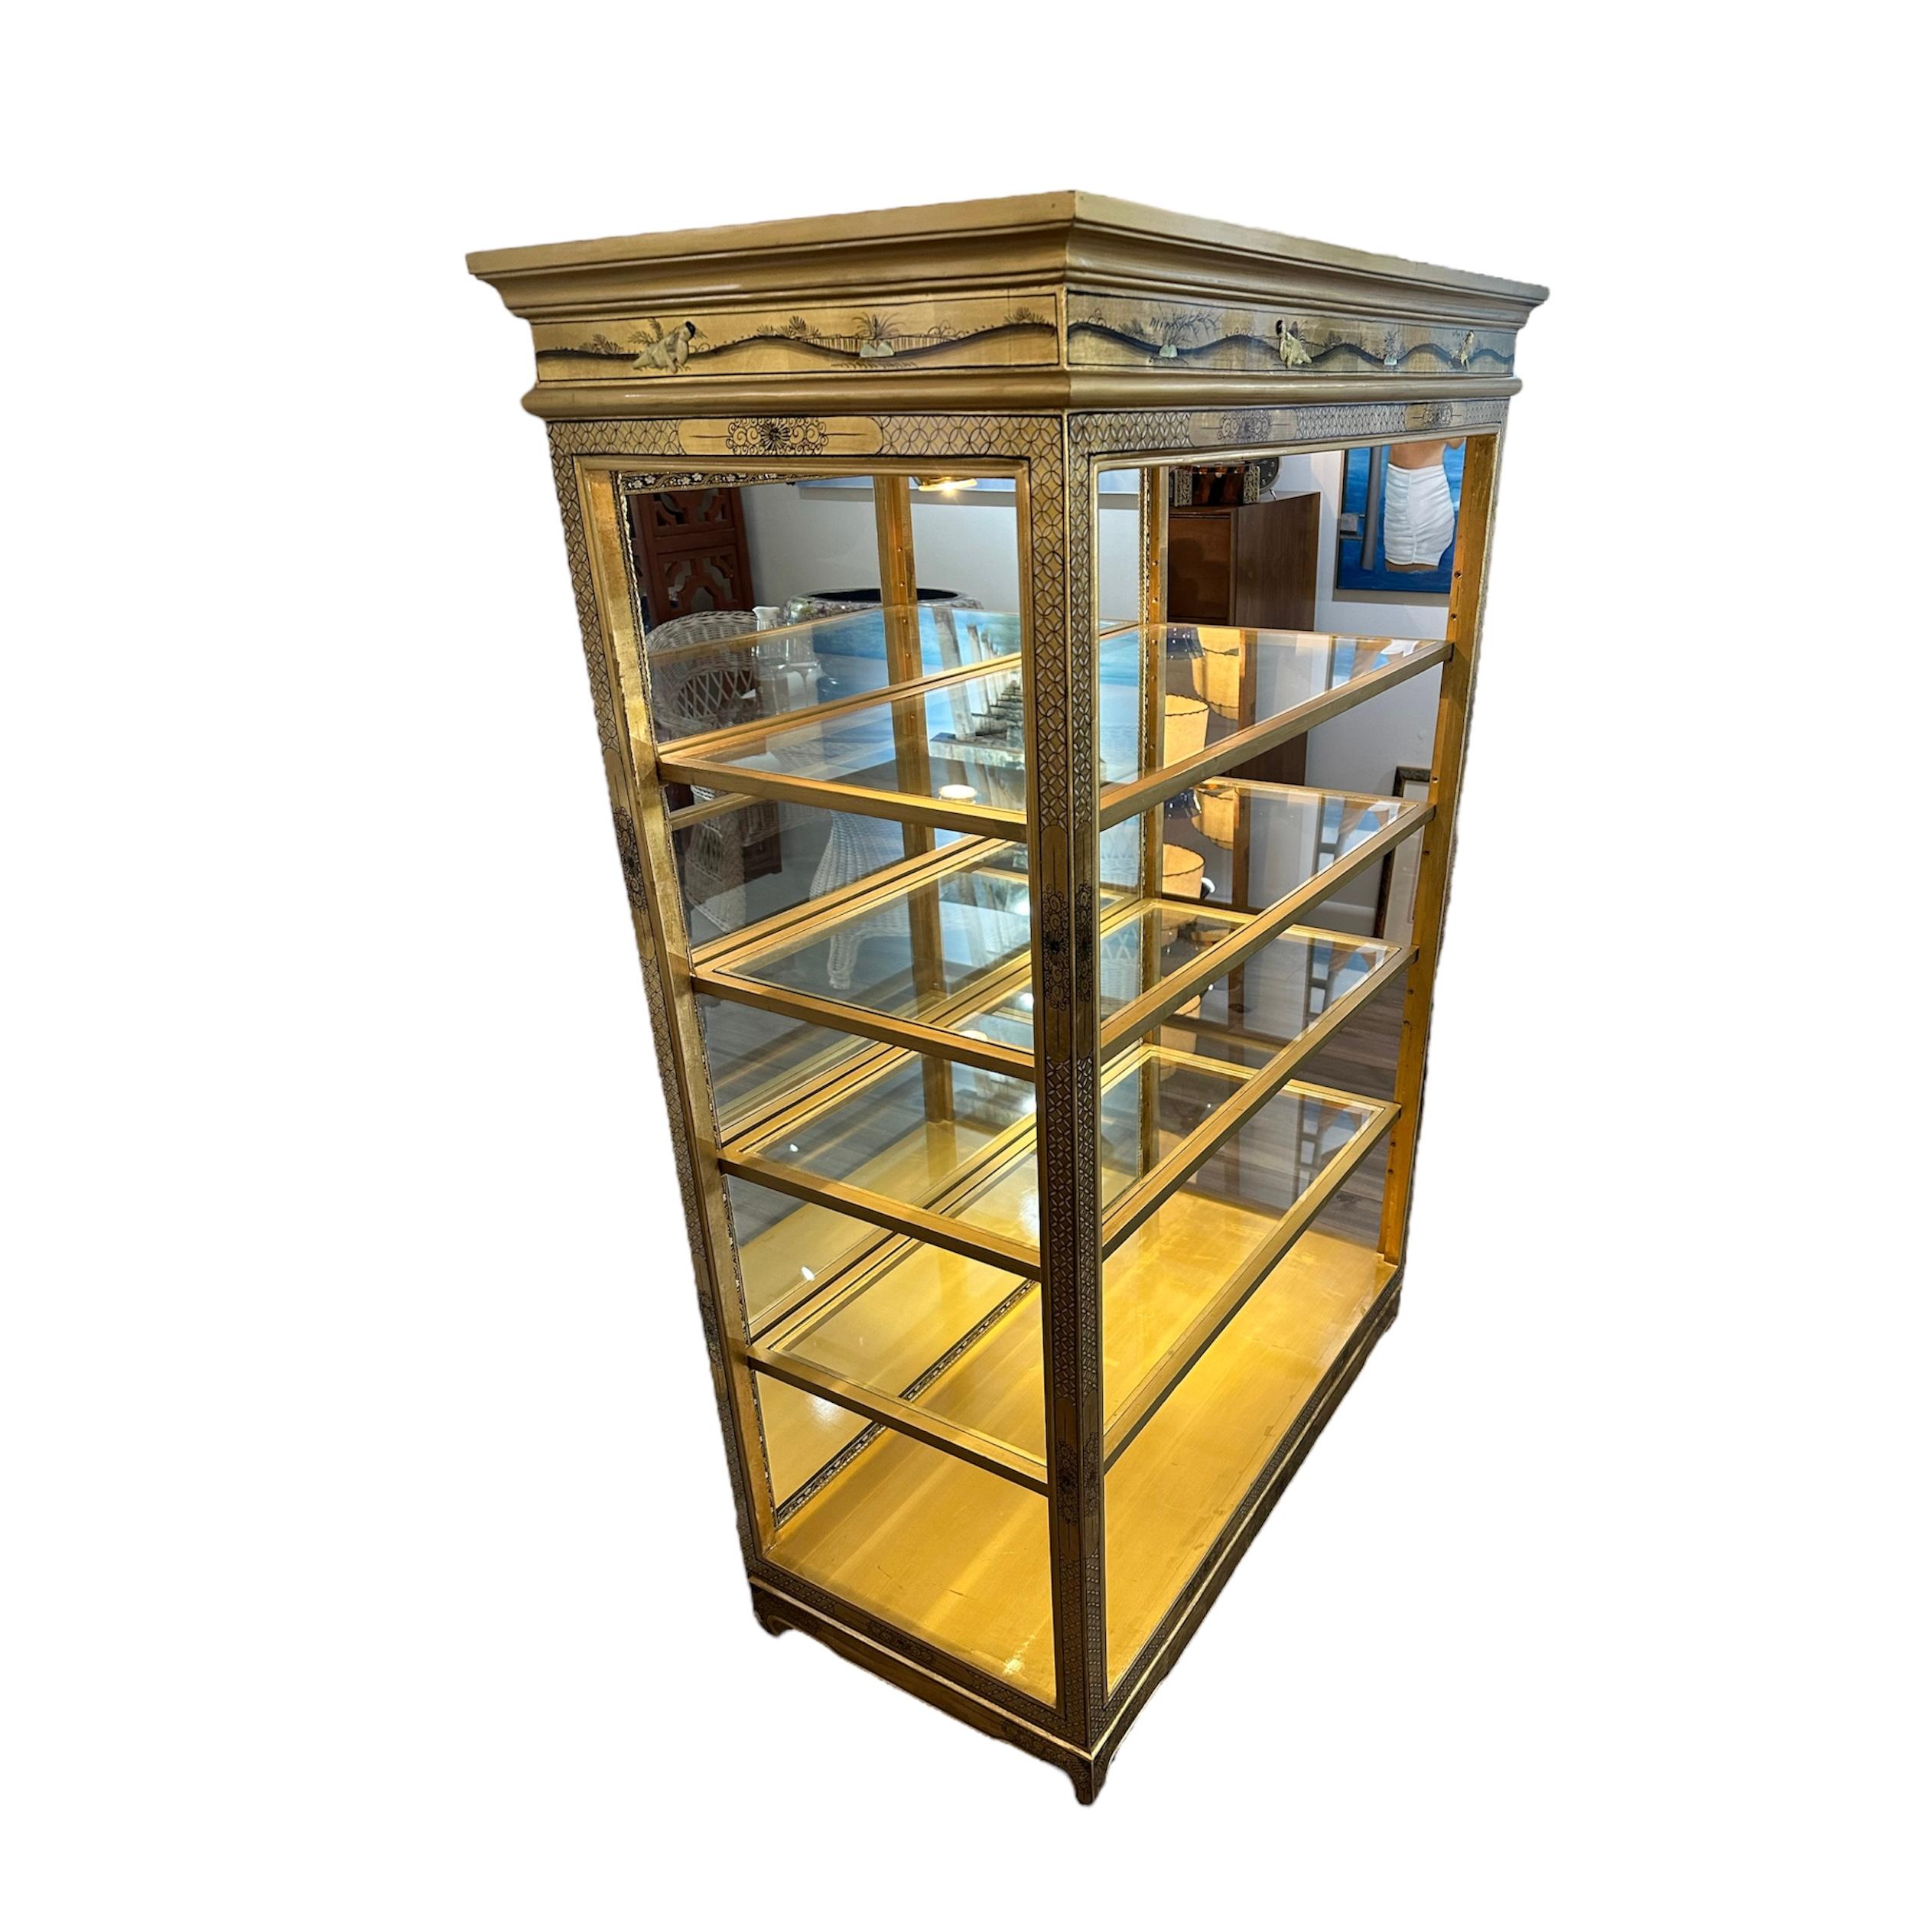 This is a beautiful curio cabinet. I have been using this as a display unit in my Consignment Gallery. What I love about it is it open on all sides so you could see feel and touch the objects and it has a mirrored back, the glass shelves are in good